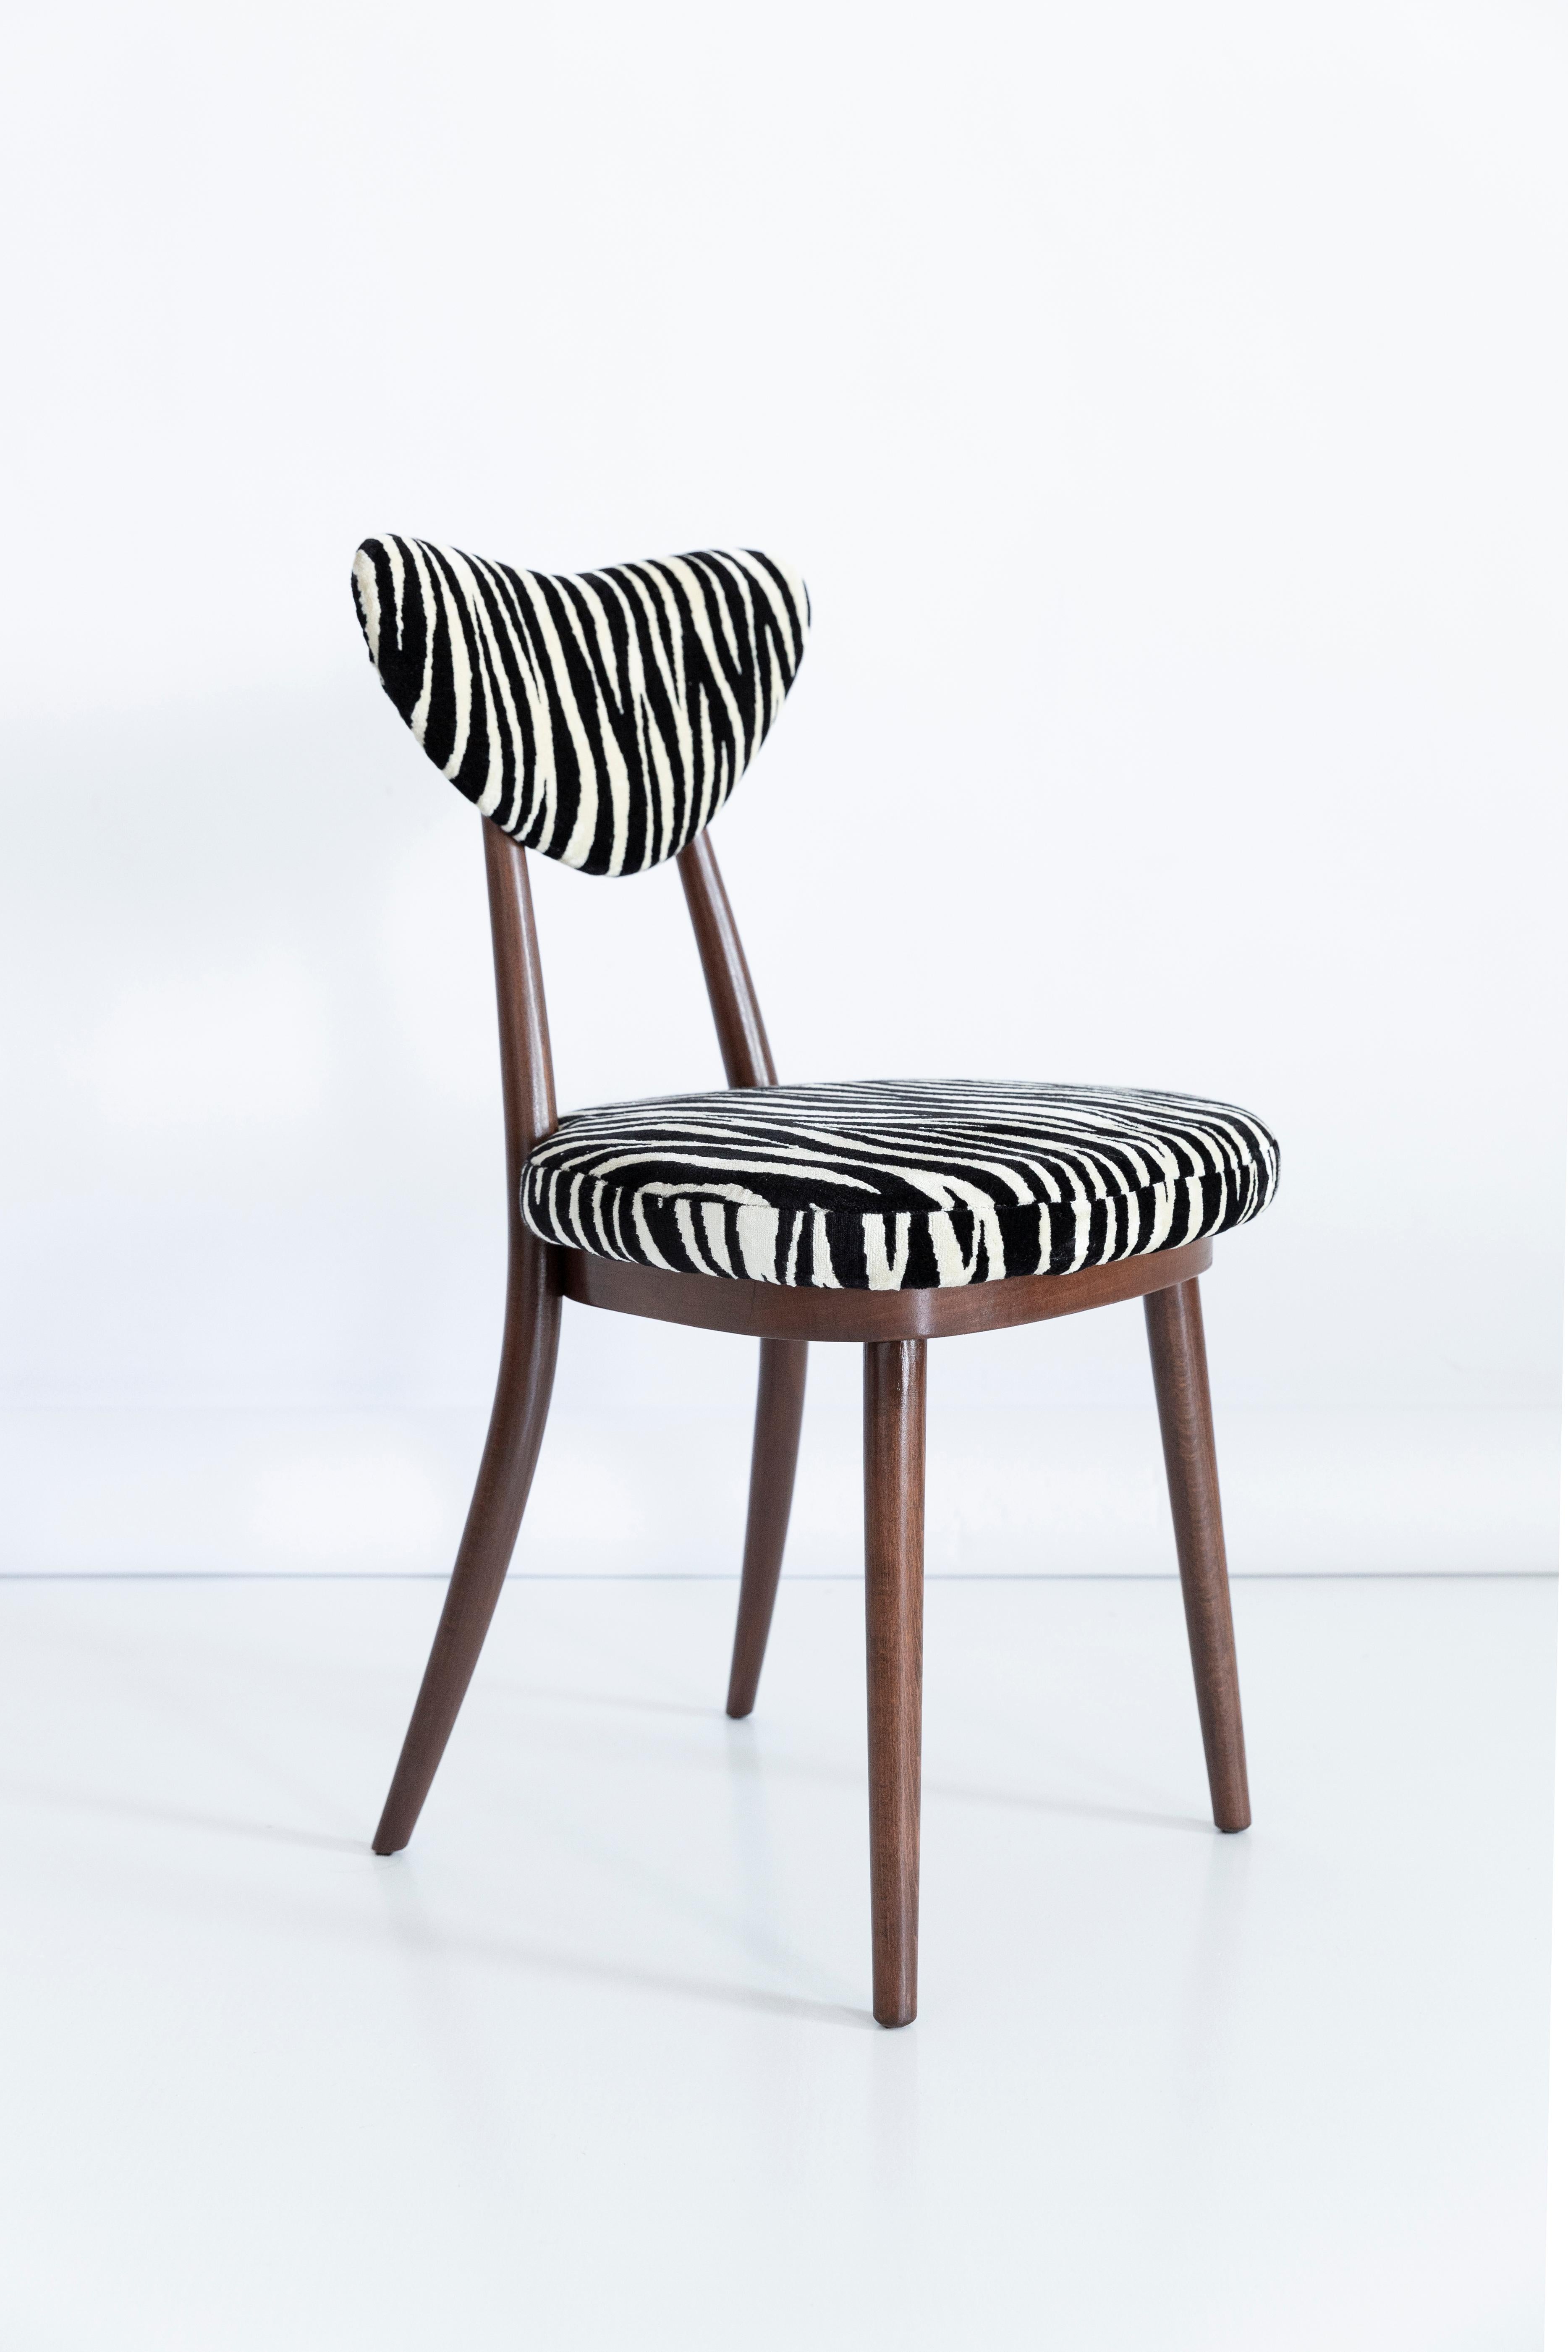 Set of Six Midcentury Zebra Black and White Heart Chairs, Poland, 1960s For Sale 4